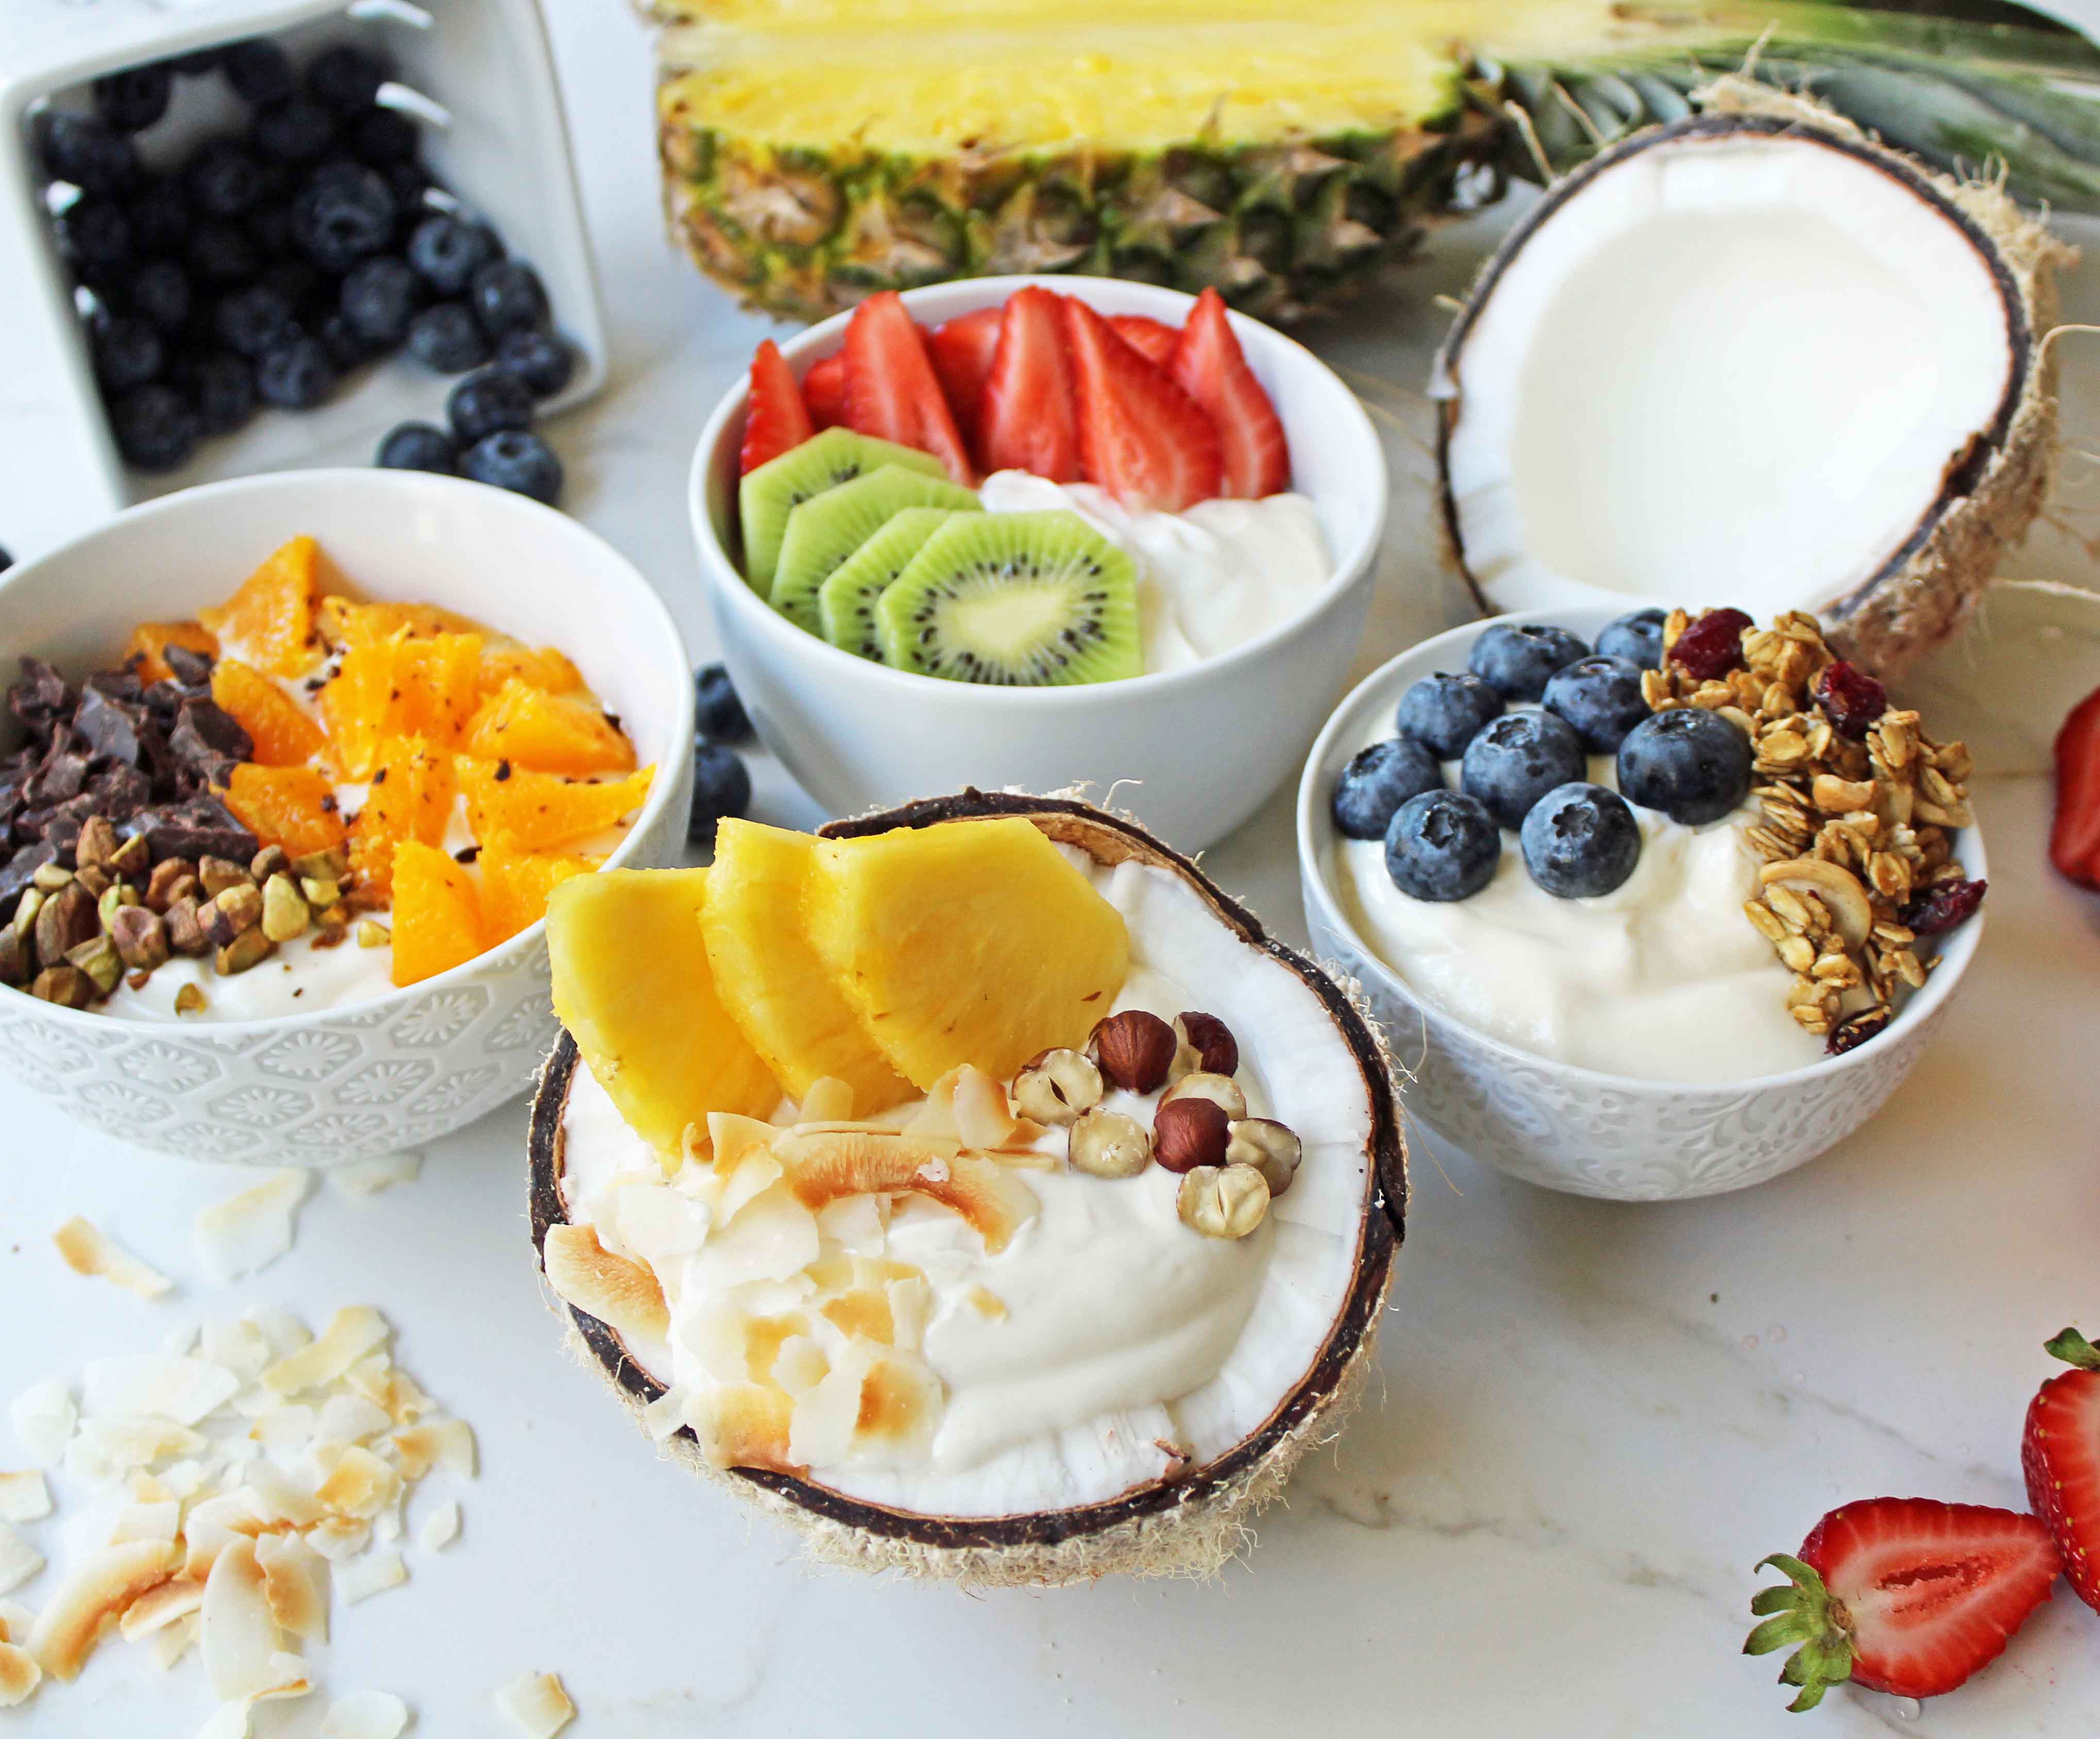 How to Build a Better Yogurt Bowl – The Fountain Avenue Kitchen